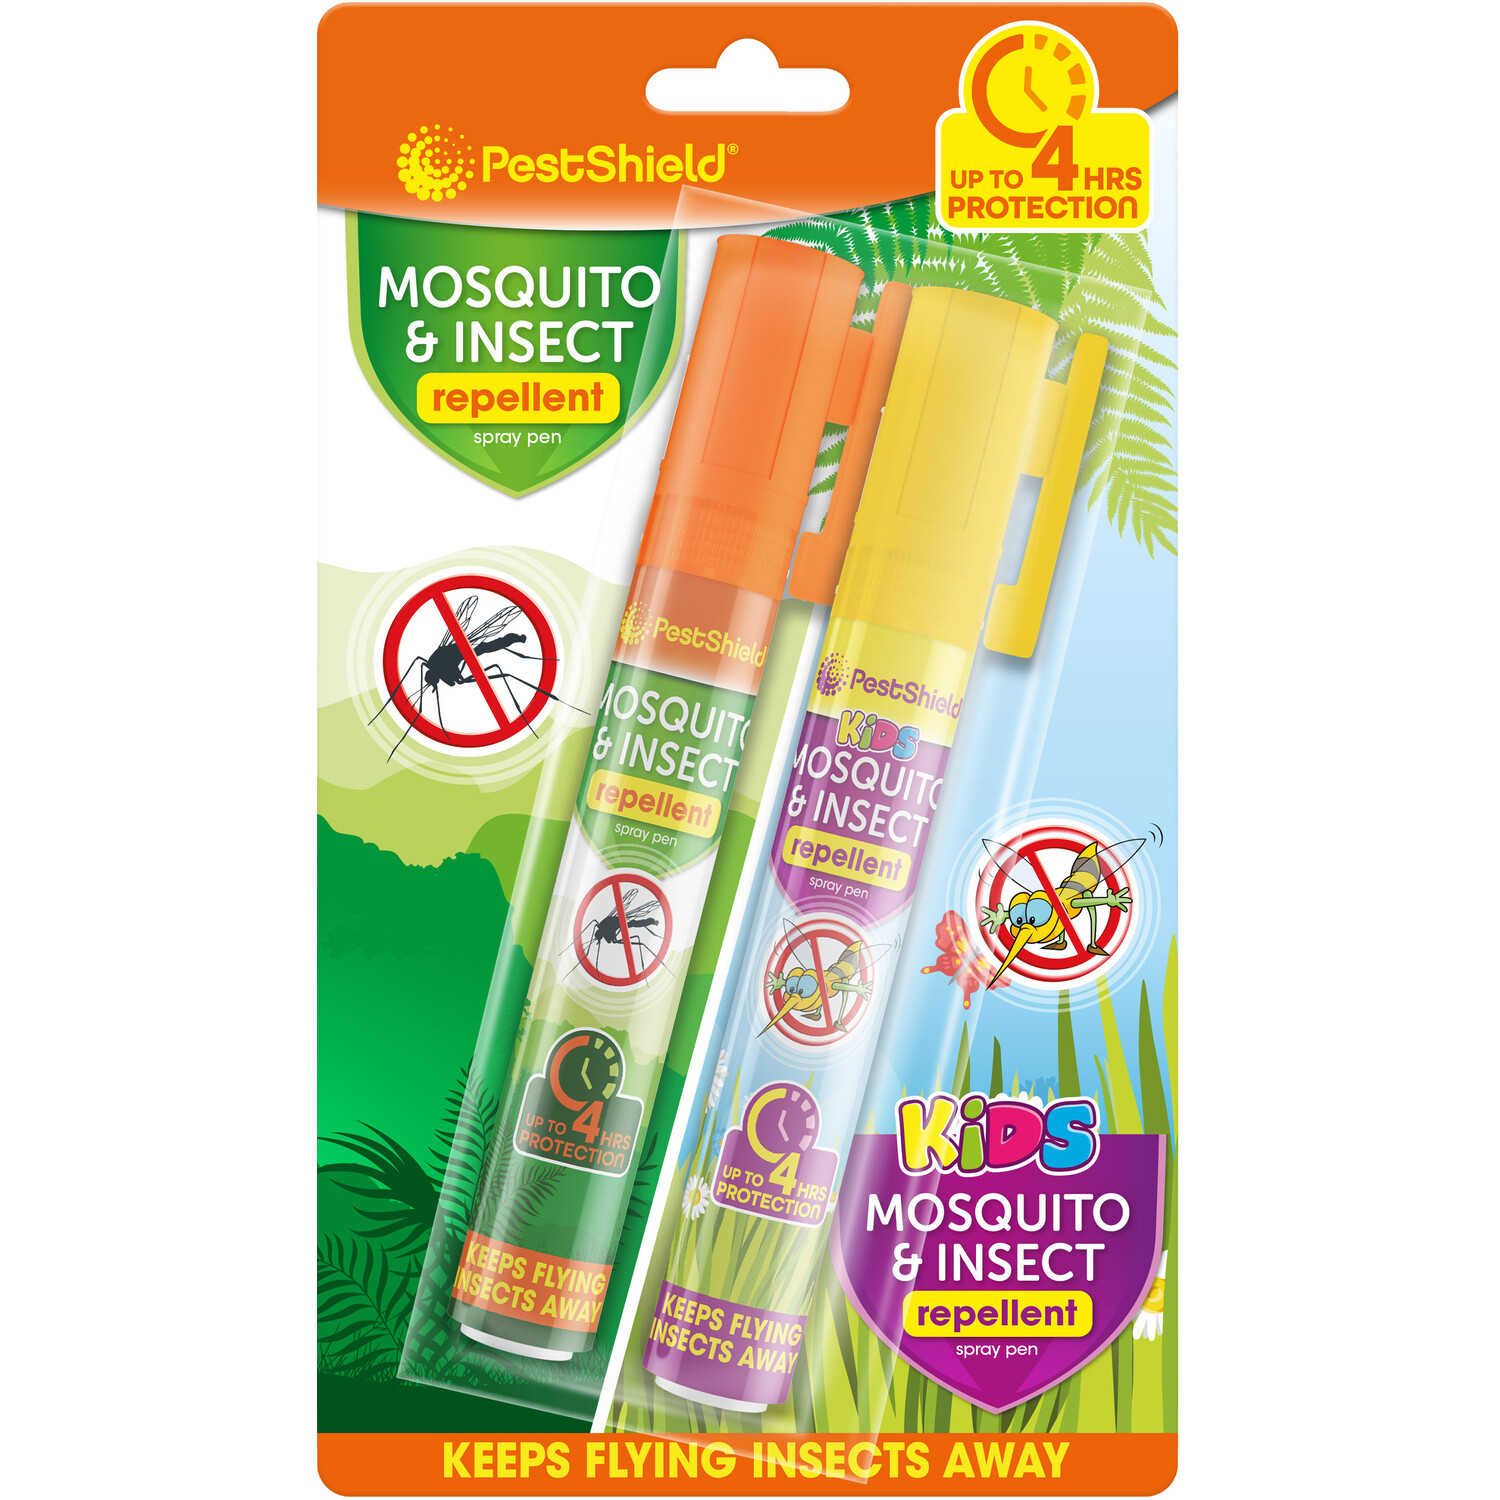 Pack of 2 Mosquito & Insect Repellent Spray Pens - Orange Image